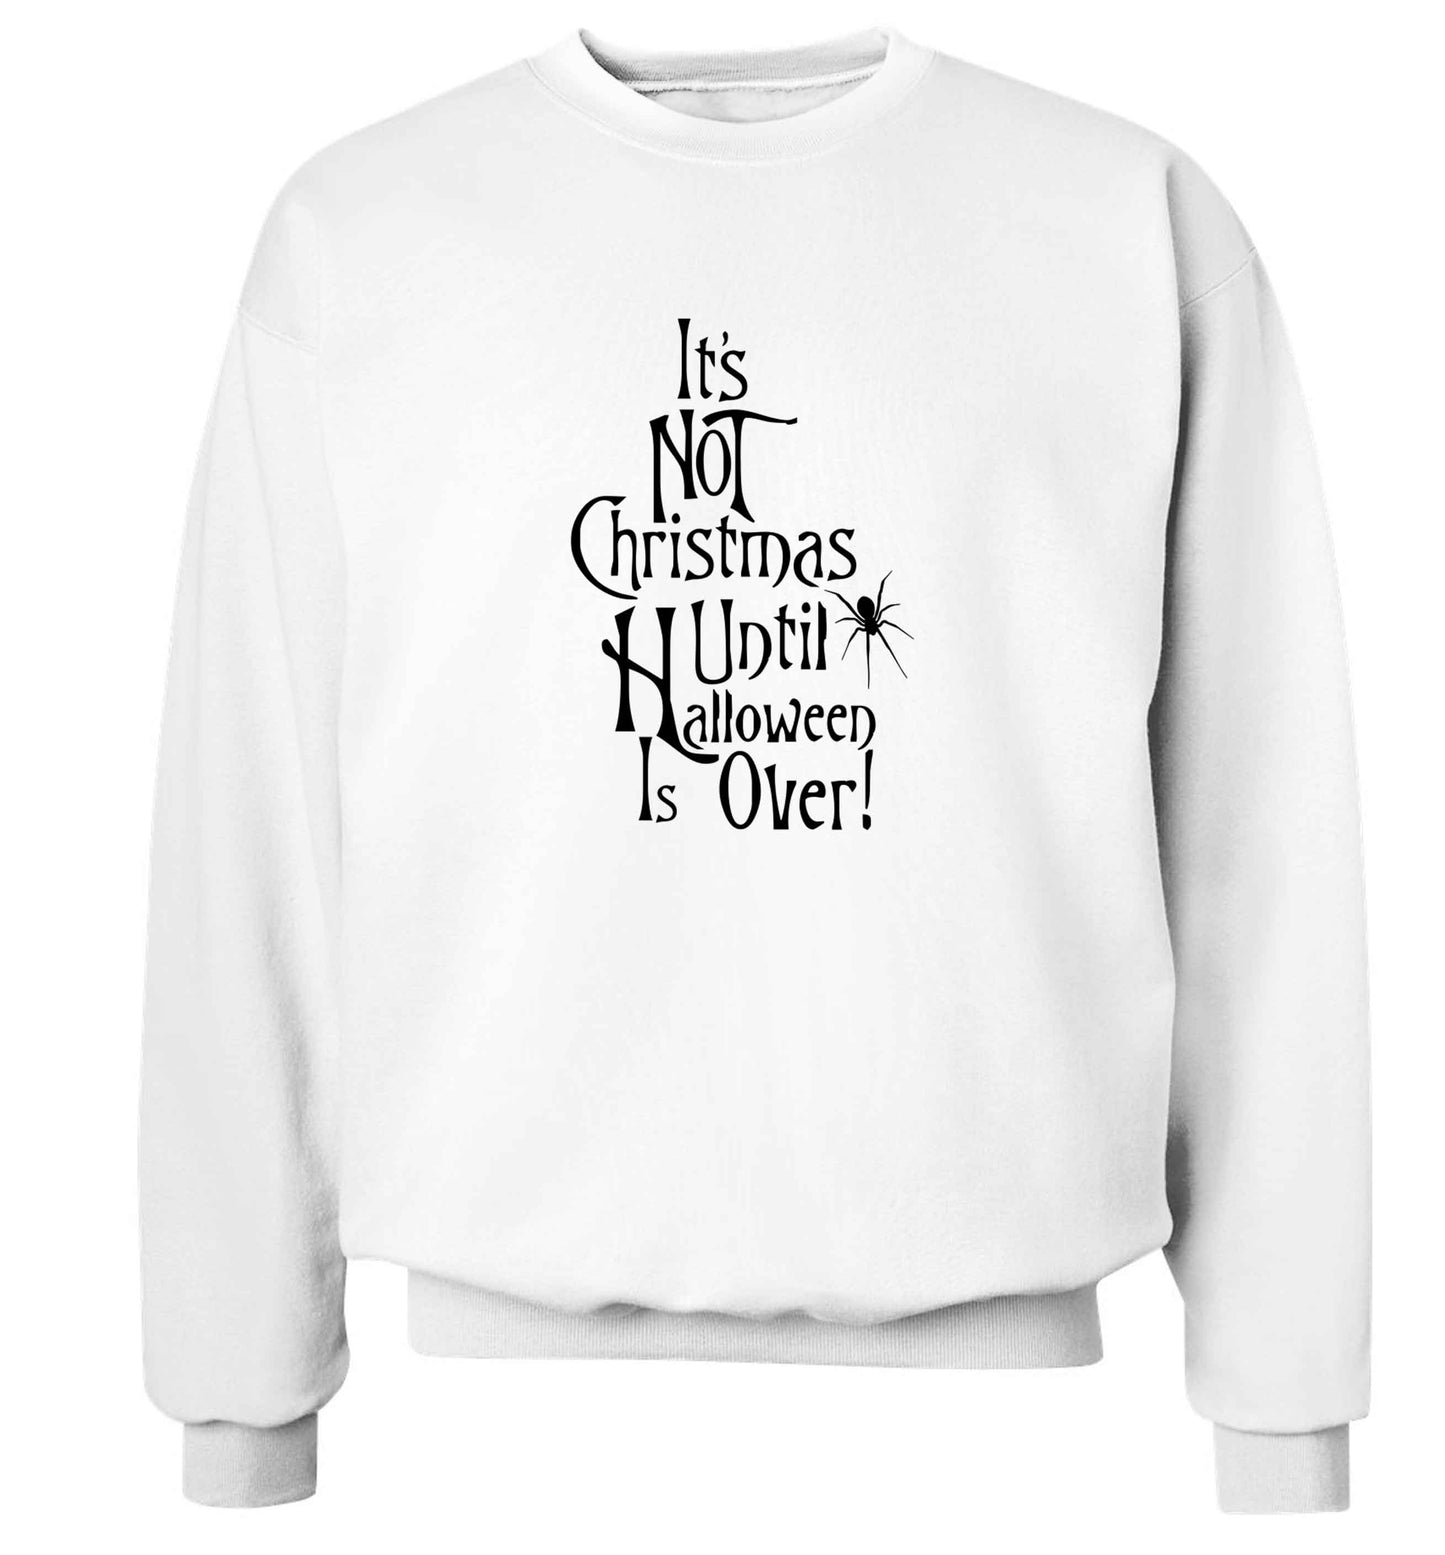 It's not Christmas until Halloween is over adult's unisex white sweater 2XL